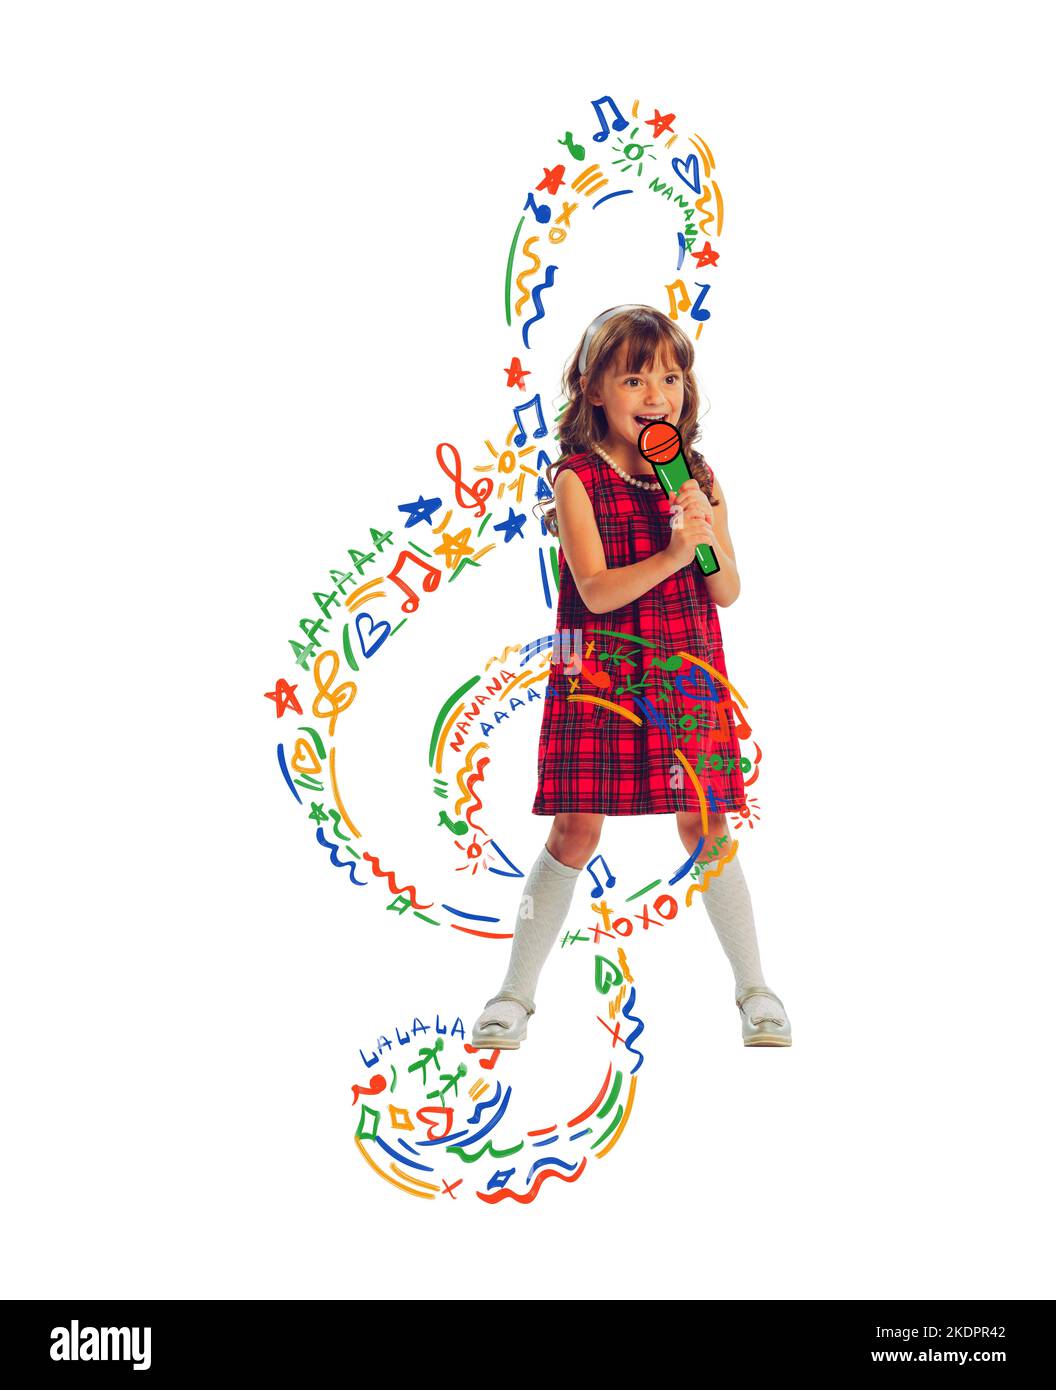 Creative colorful design. Contemporary art collage. Cute little girl, child dreaming to become a singer. Stock Photo